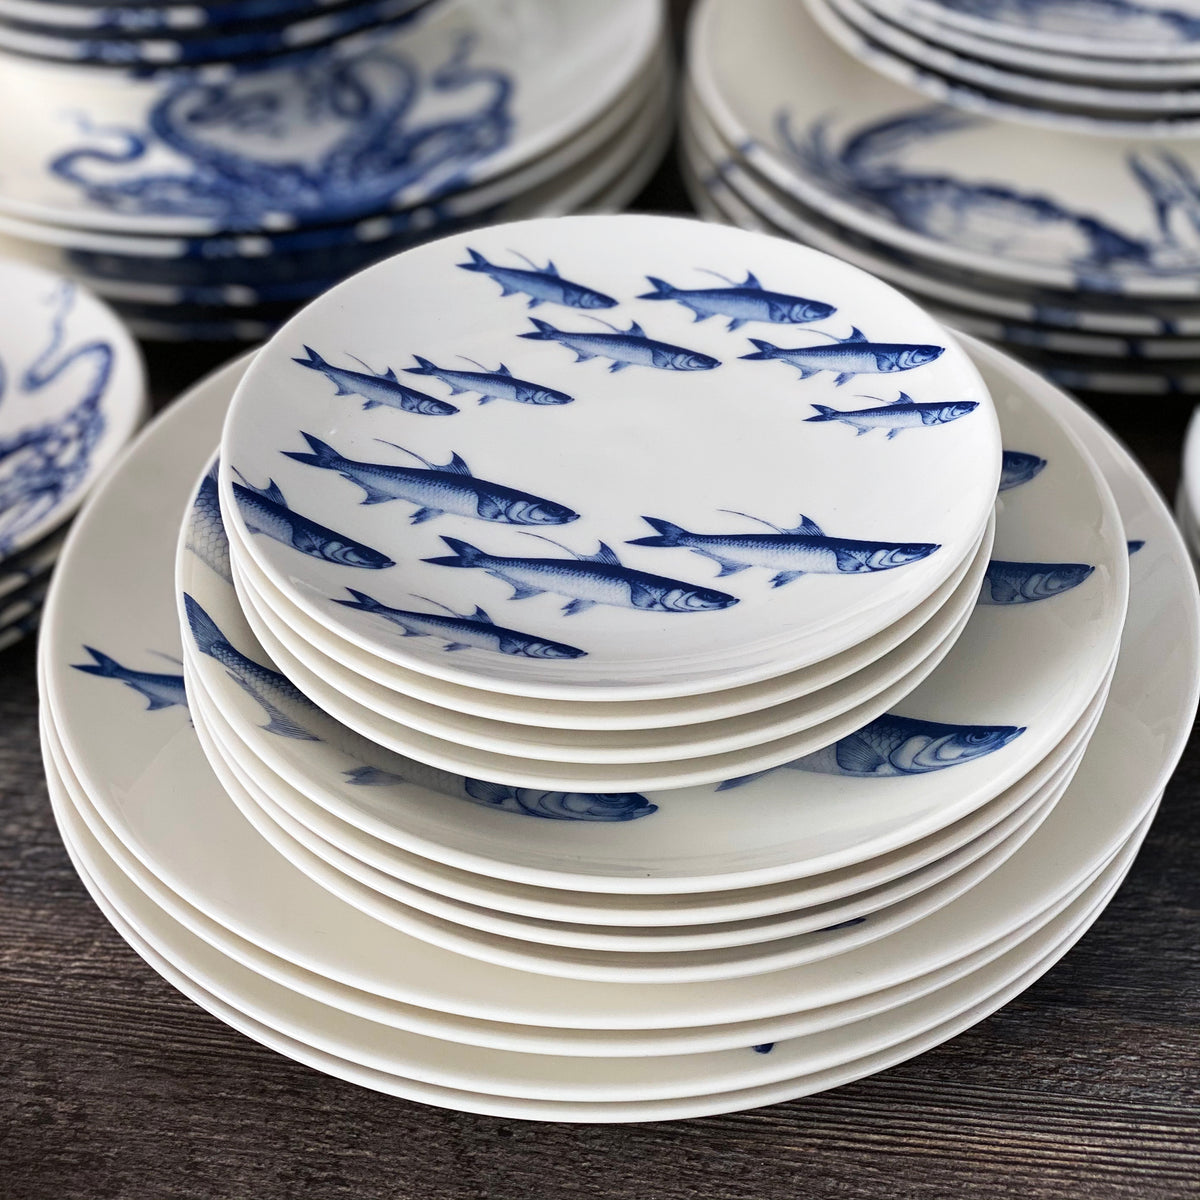 Stack of white ceramic plates decorated with blue fish patterns arranged on a dark wooden surface. These Caskata Artisanal Home School of Fish Small Plates, featuring a school of fish design, are also microwave safe for your convenience.